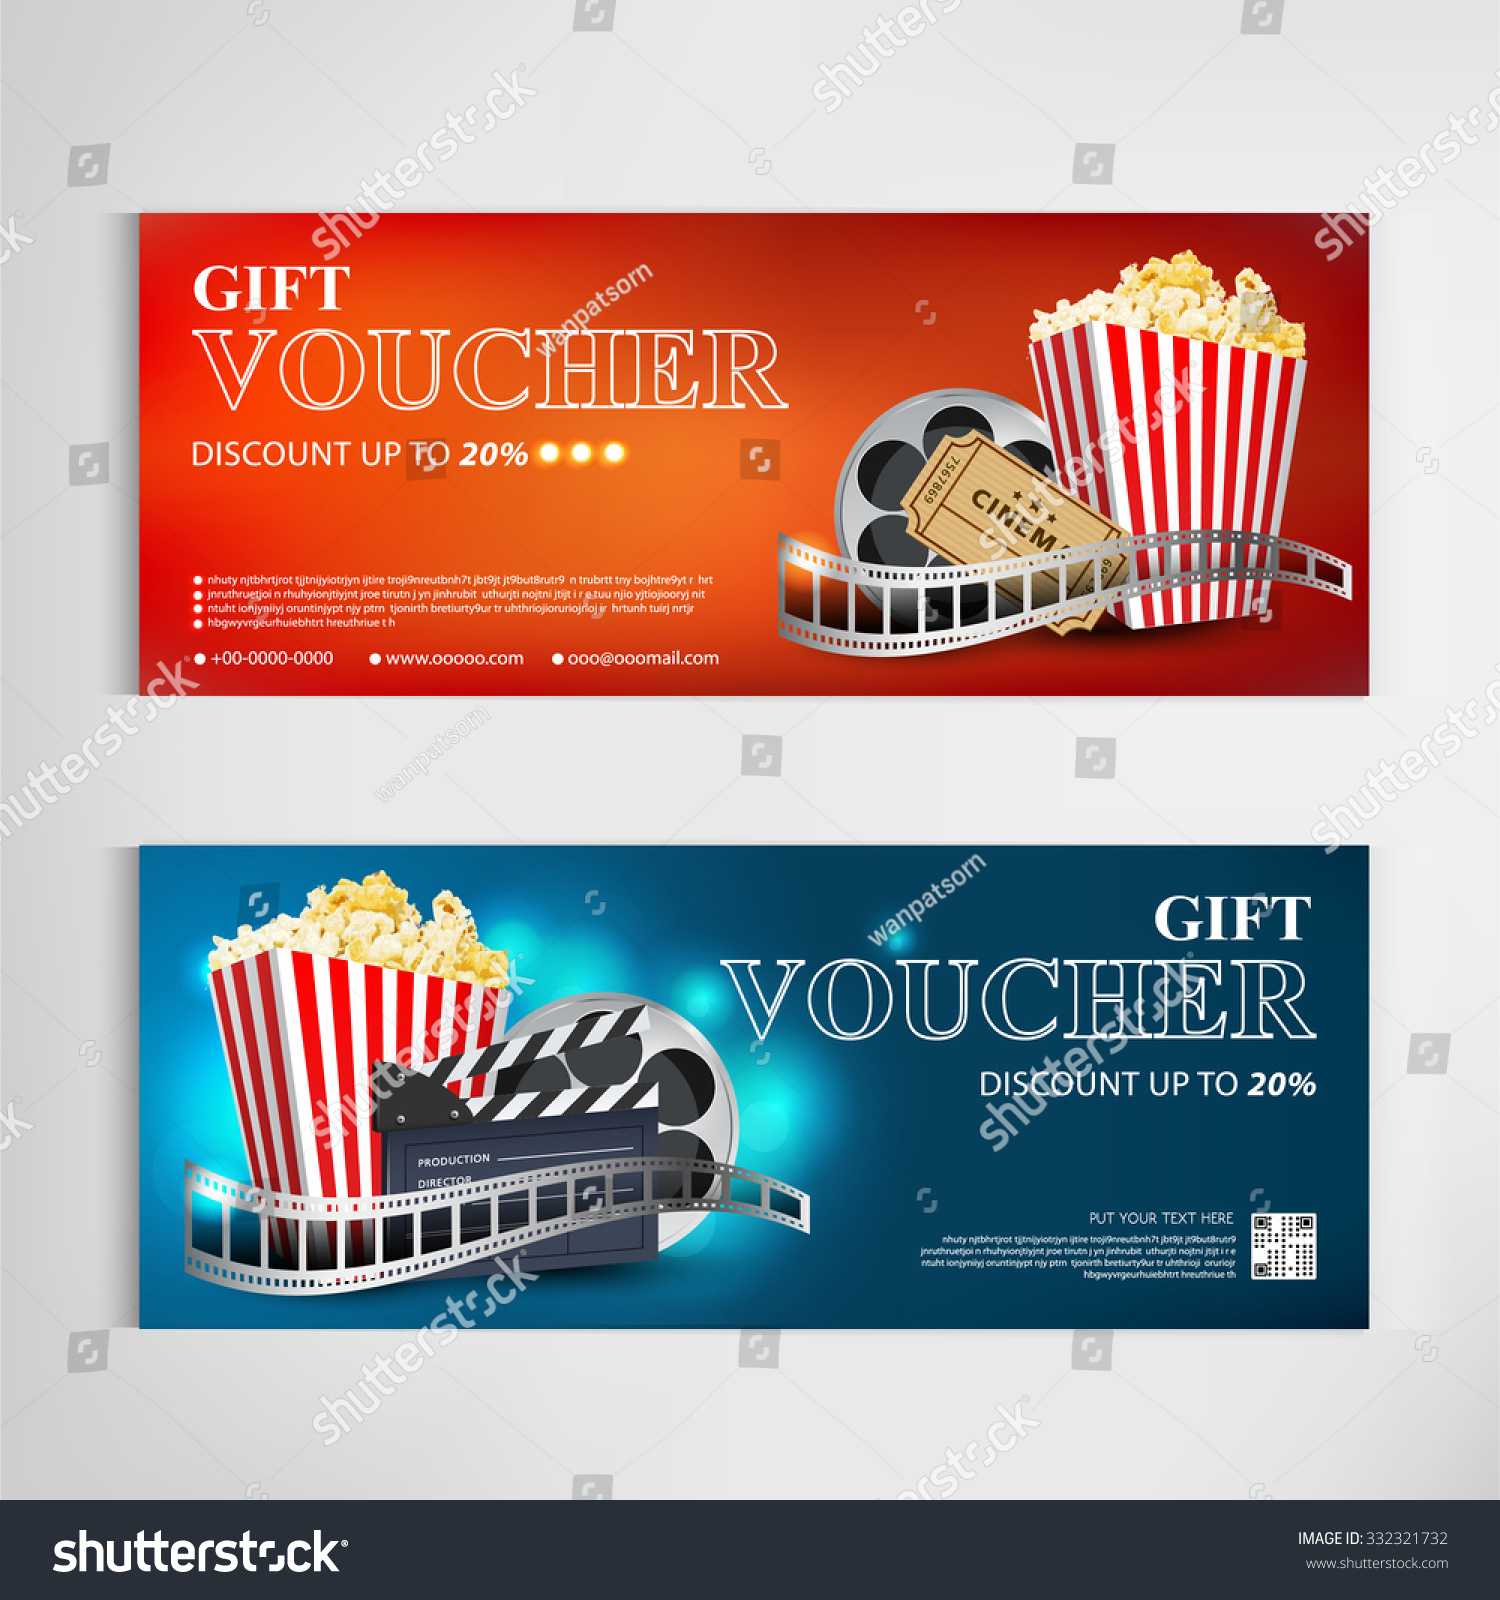 Gift Voucher Movie Template Modern… Stock Photo 332321732 With Regard To Movie Gift Certificate Template